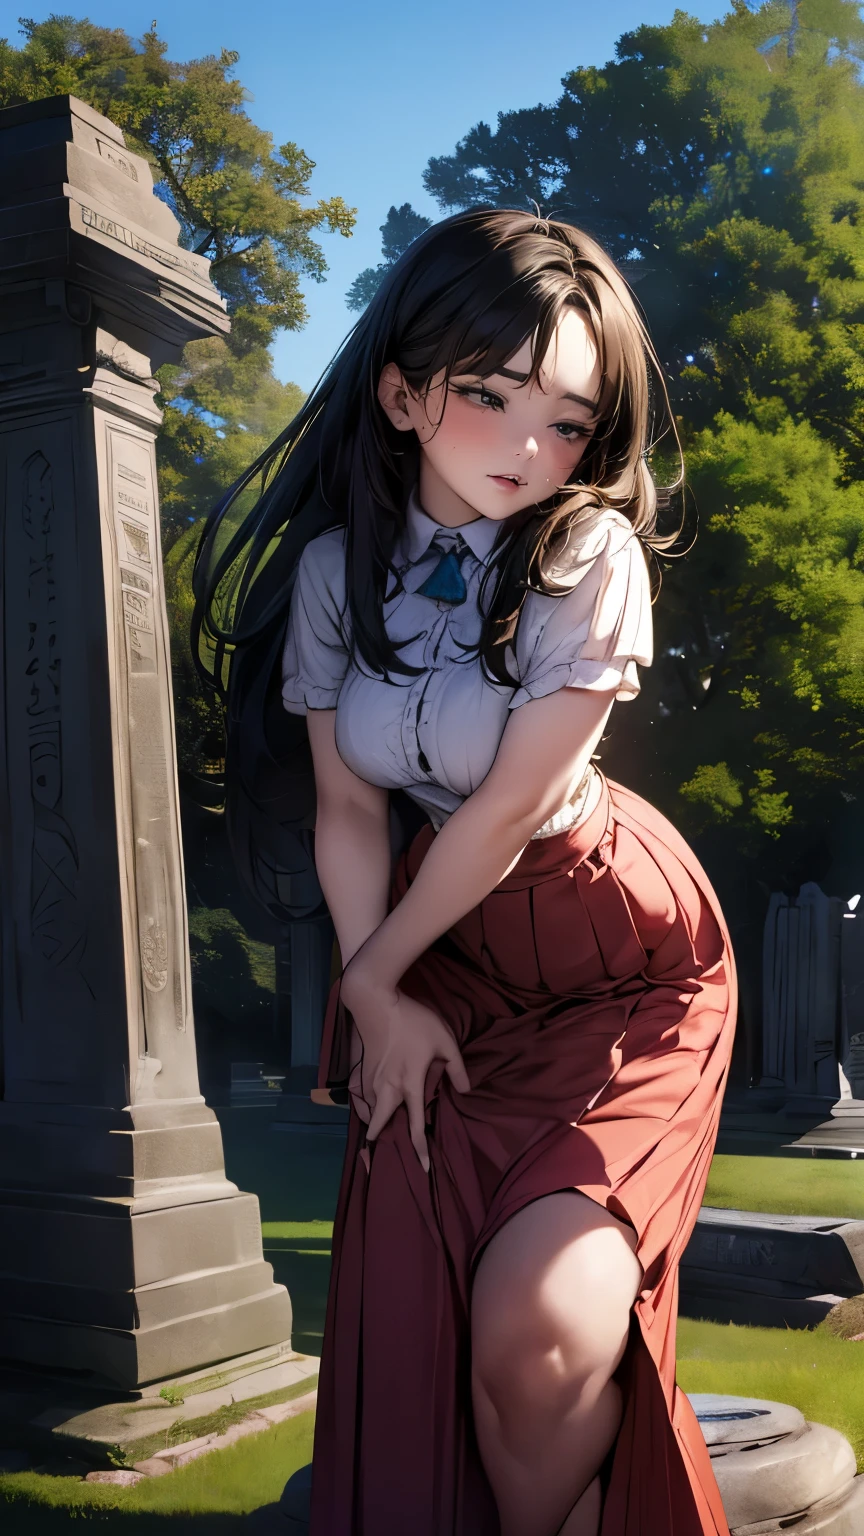 drooping eyes, ecstasy, (((round face))), (((straddling to hit her crotch against a standing stone monument, eccentric pose))), (((hide crotch with a long skirt))), (bending legs to open legs), orgasm, outside,